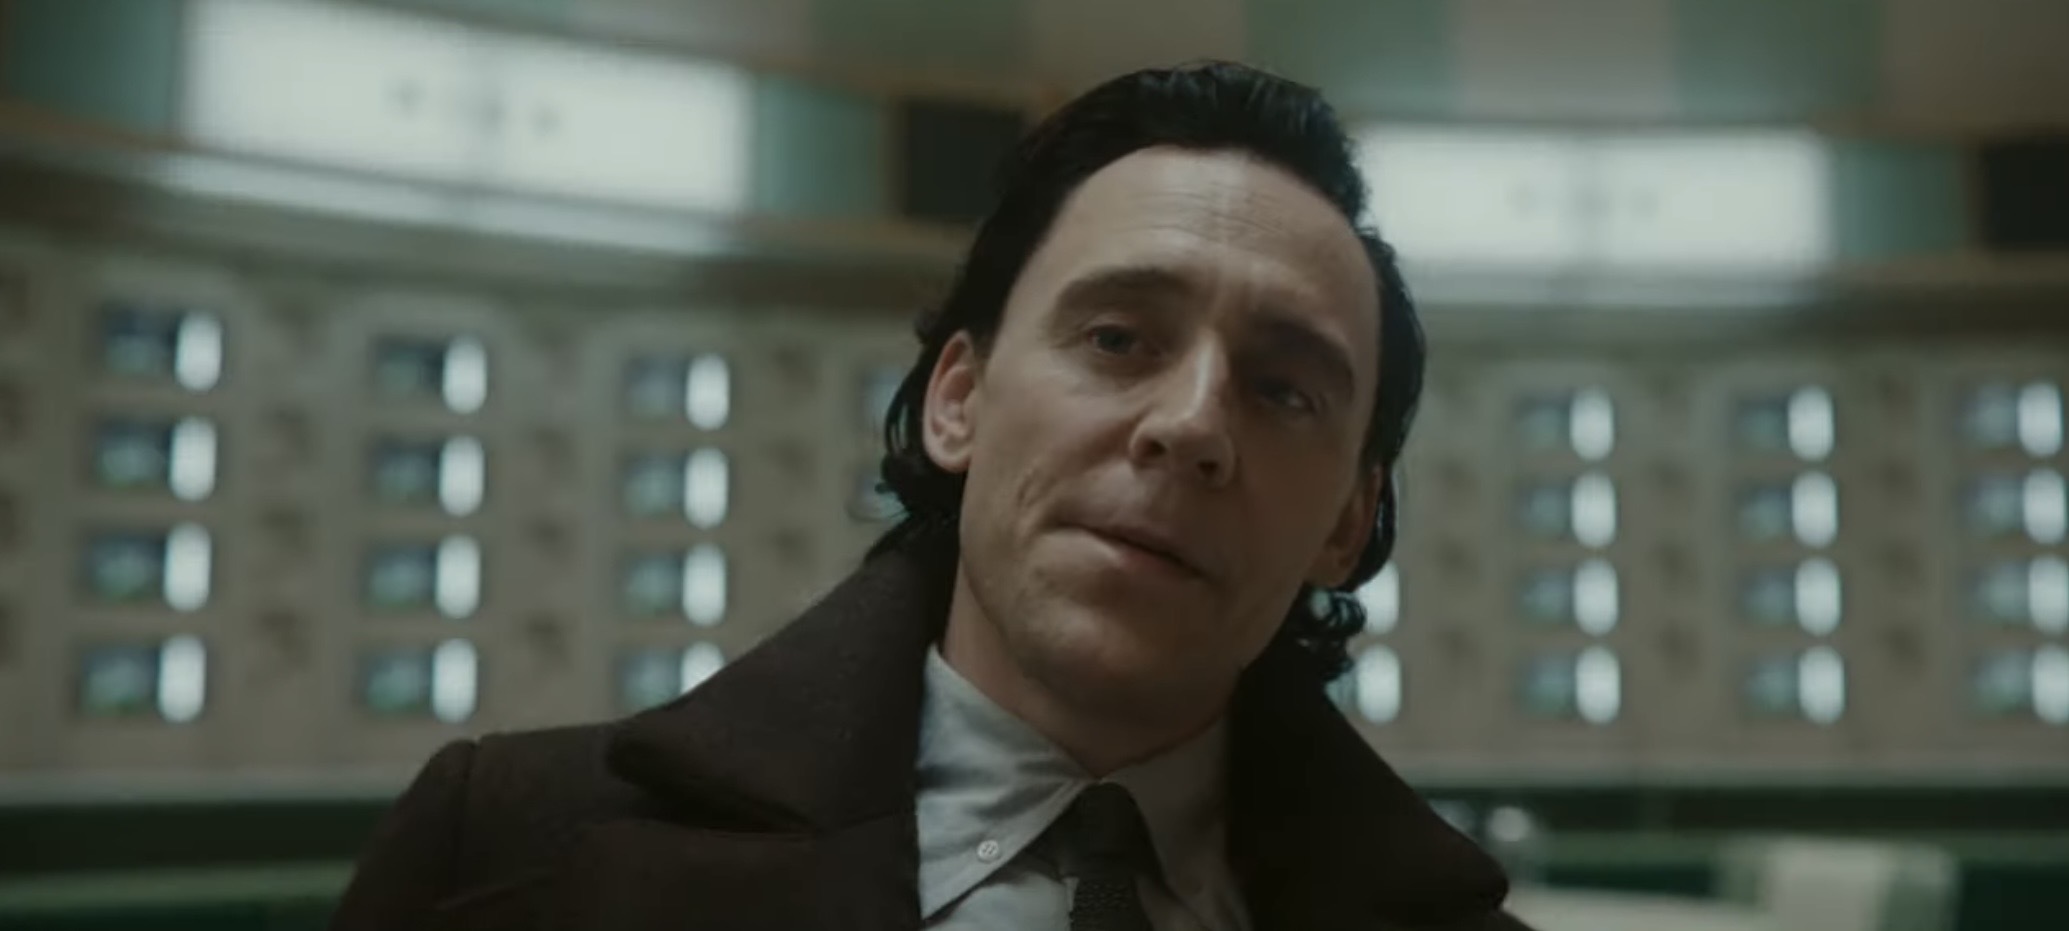 Check out the first trailer for the 2nd season of 'Loki' with Tom Hiddleston